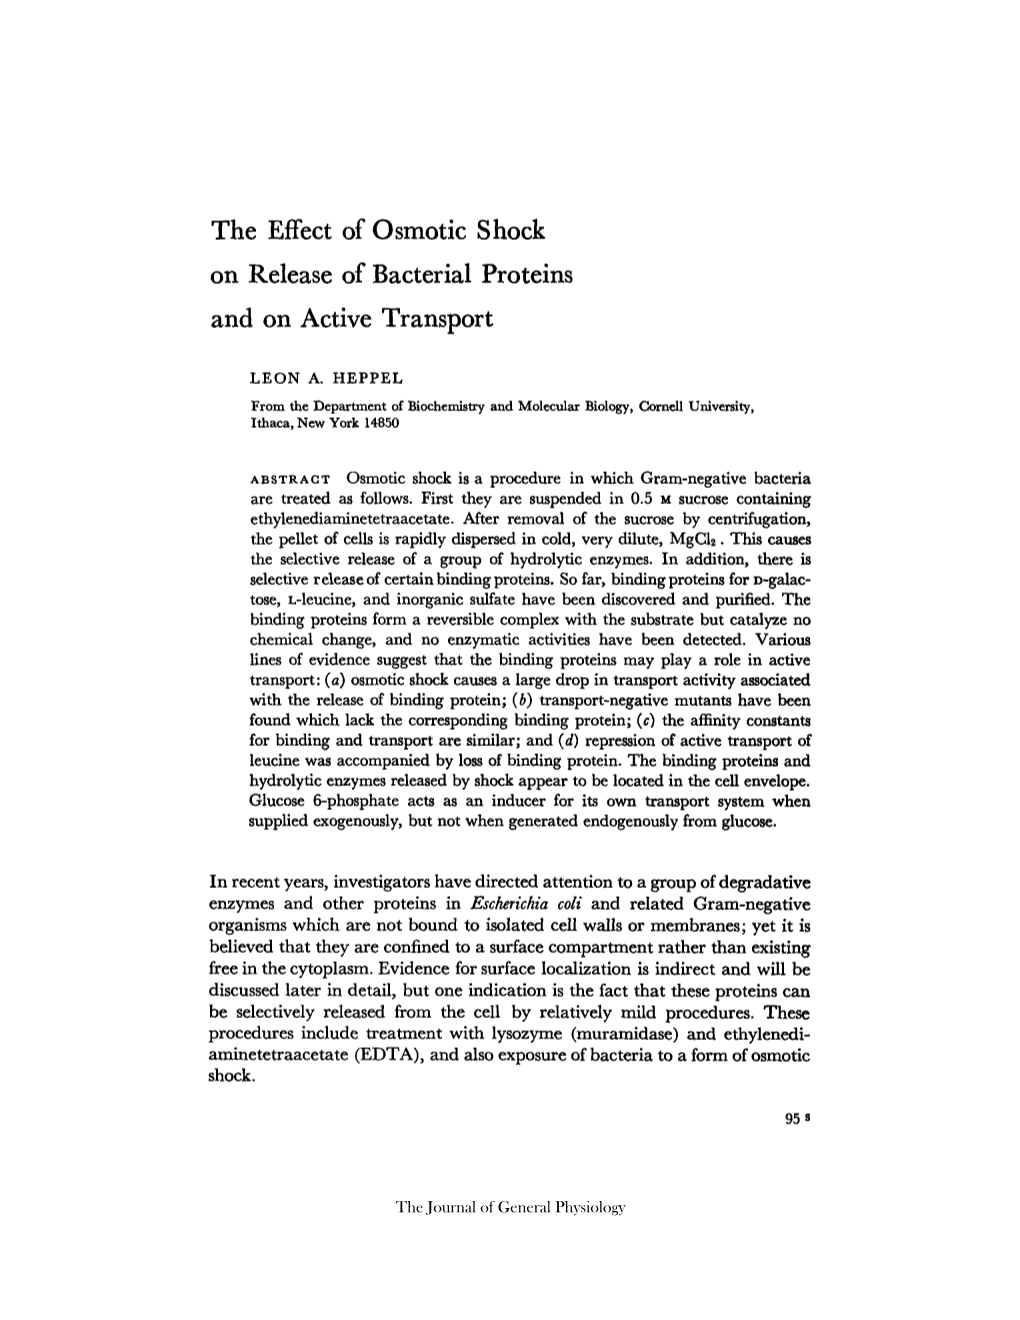 The Effect of Osmotic Shock on Release of Bacterial Proteins and on Active Transport